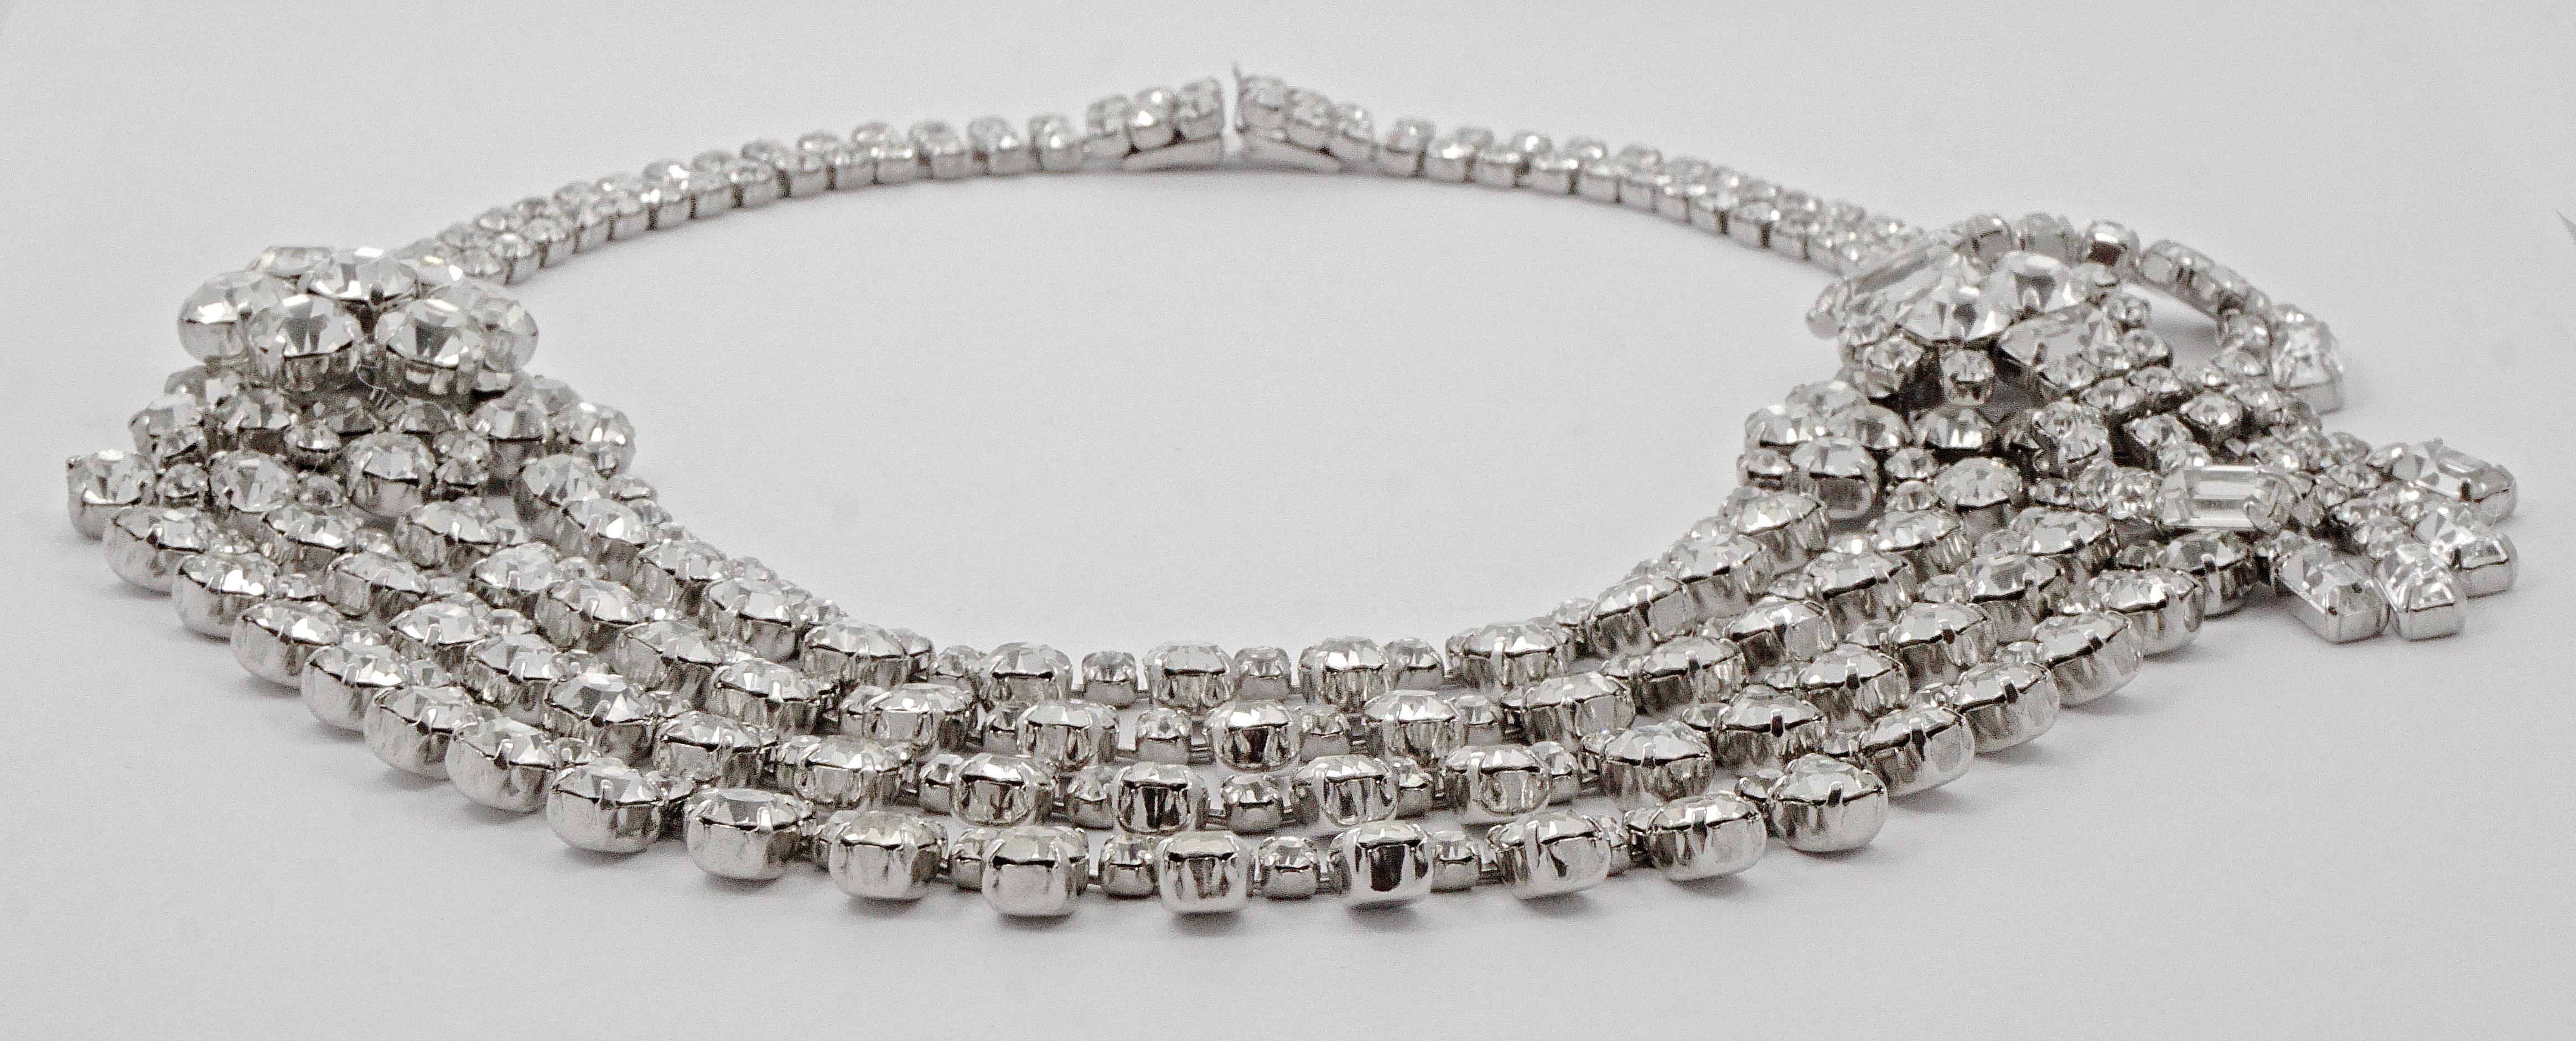 Silver Plated Four Strand Rhinestone Statement Collar Necklace circa 1950s For Sale 3